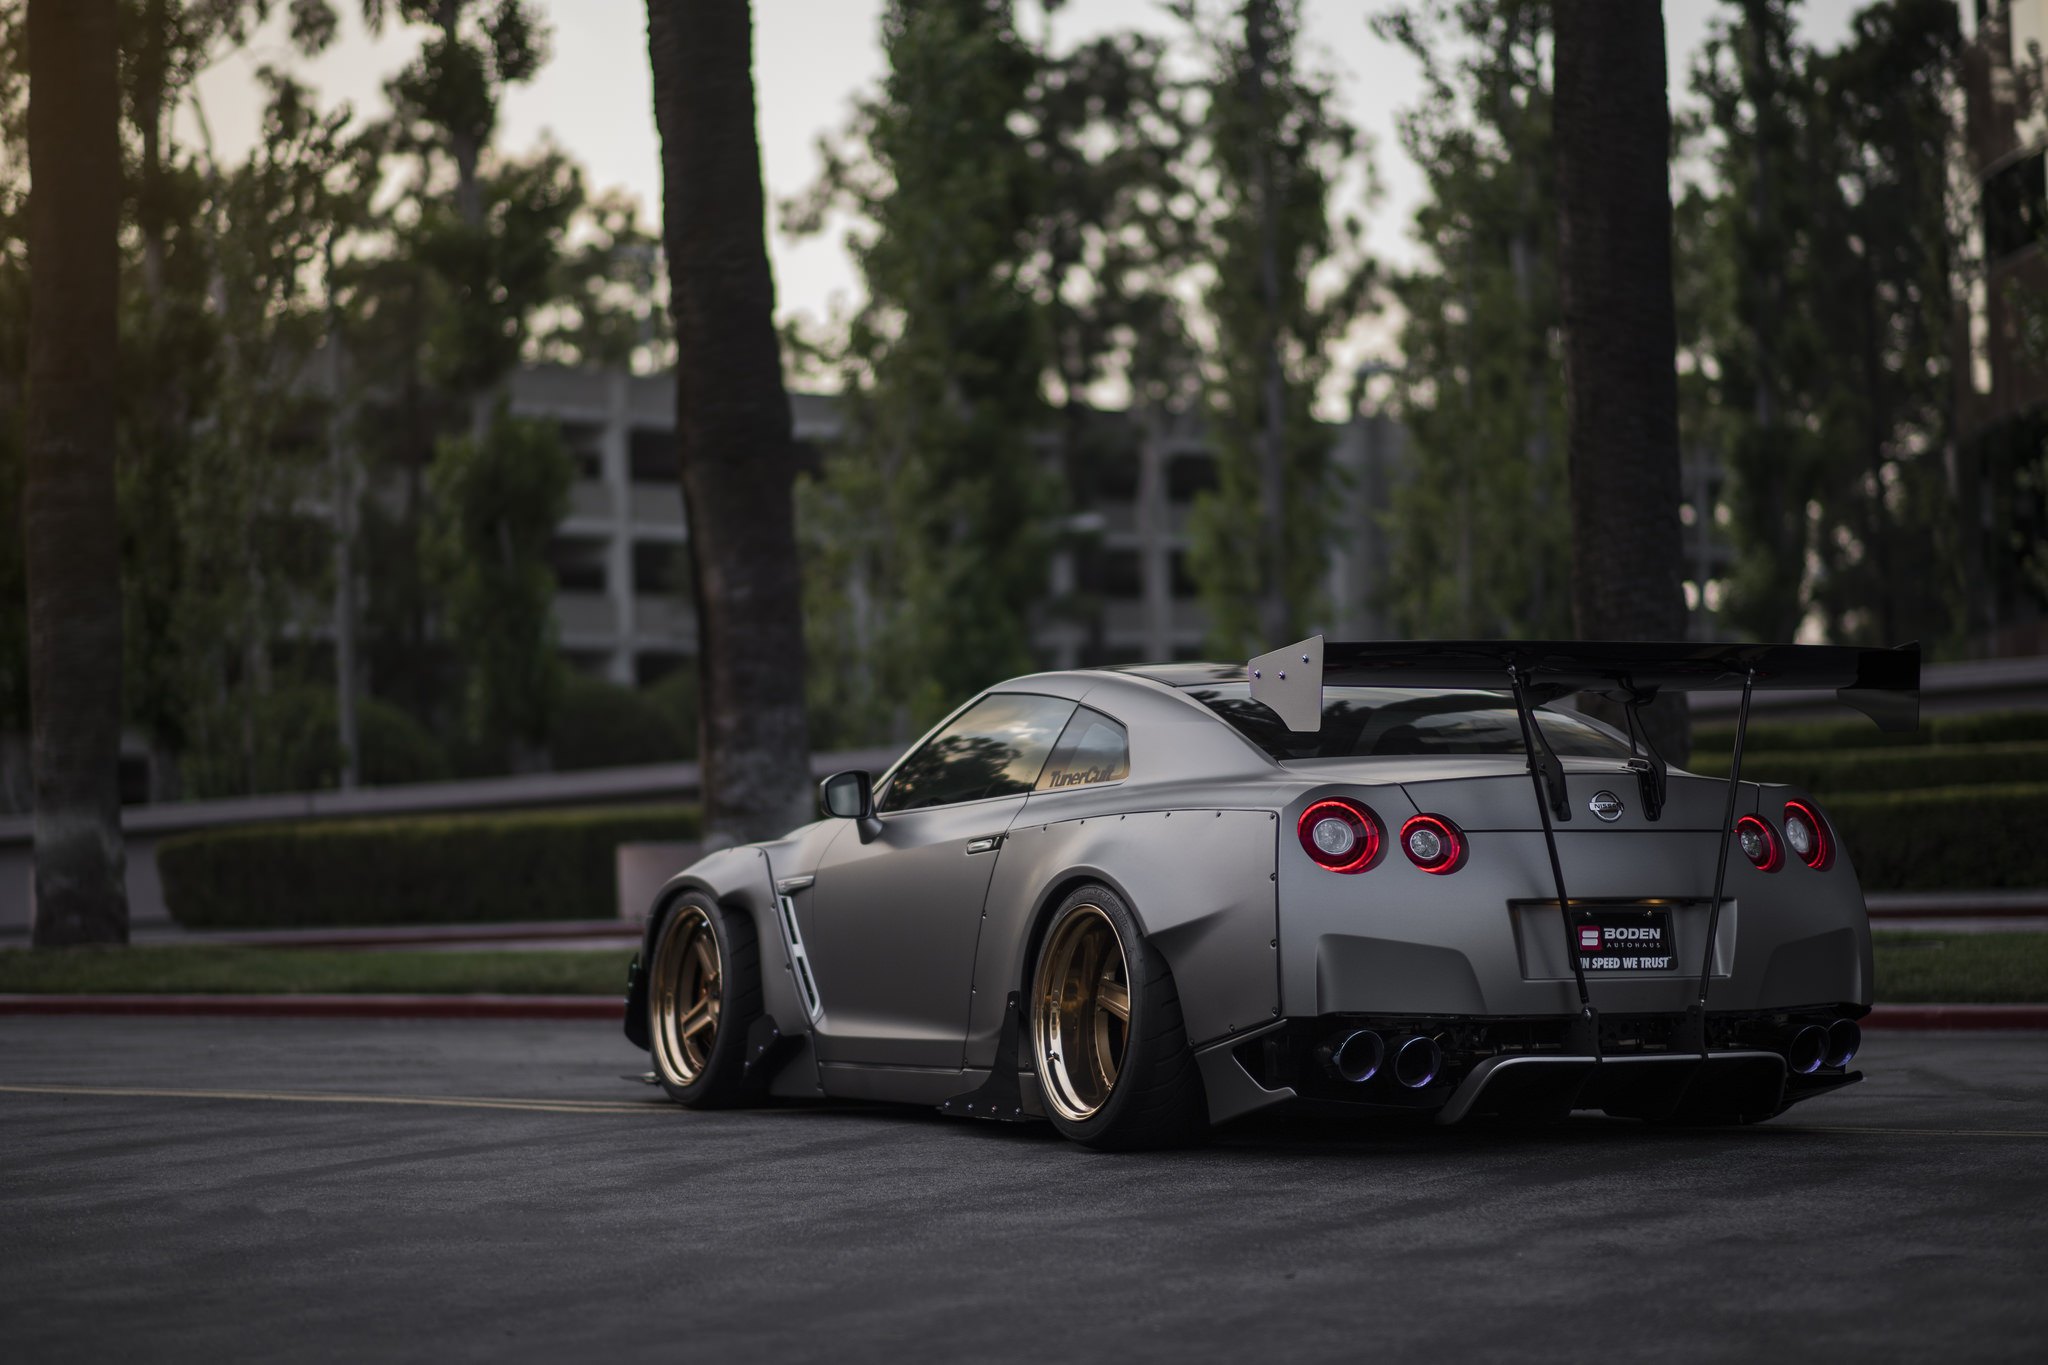 Large Wing Spoiler on Gray Nissan GT-R - Photo by Vossen